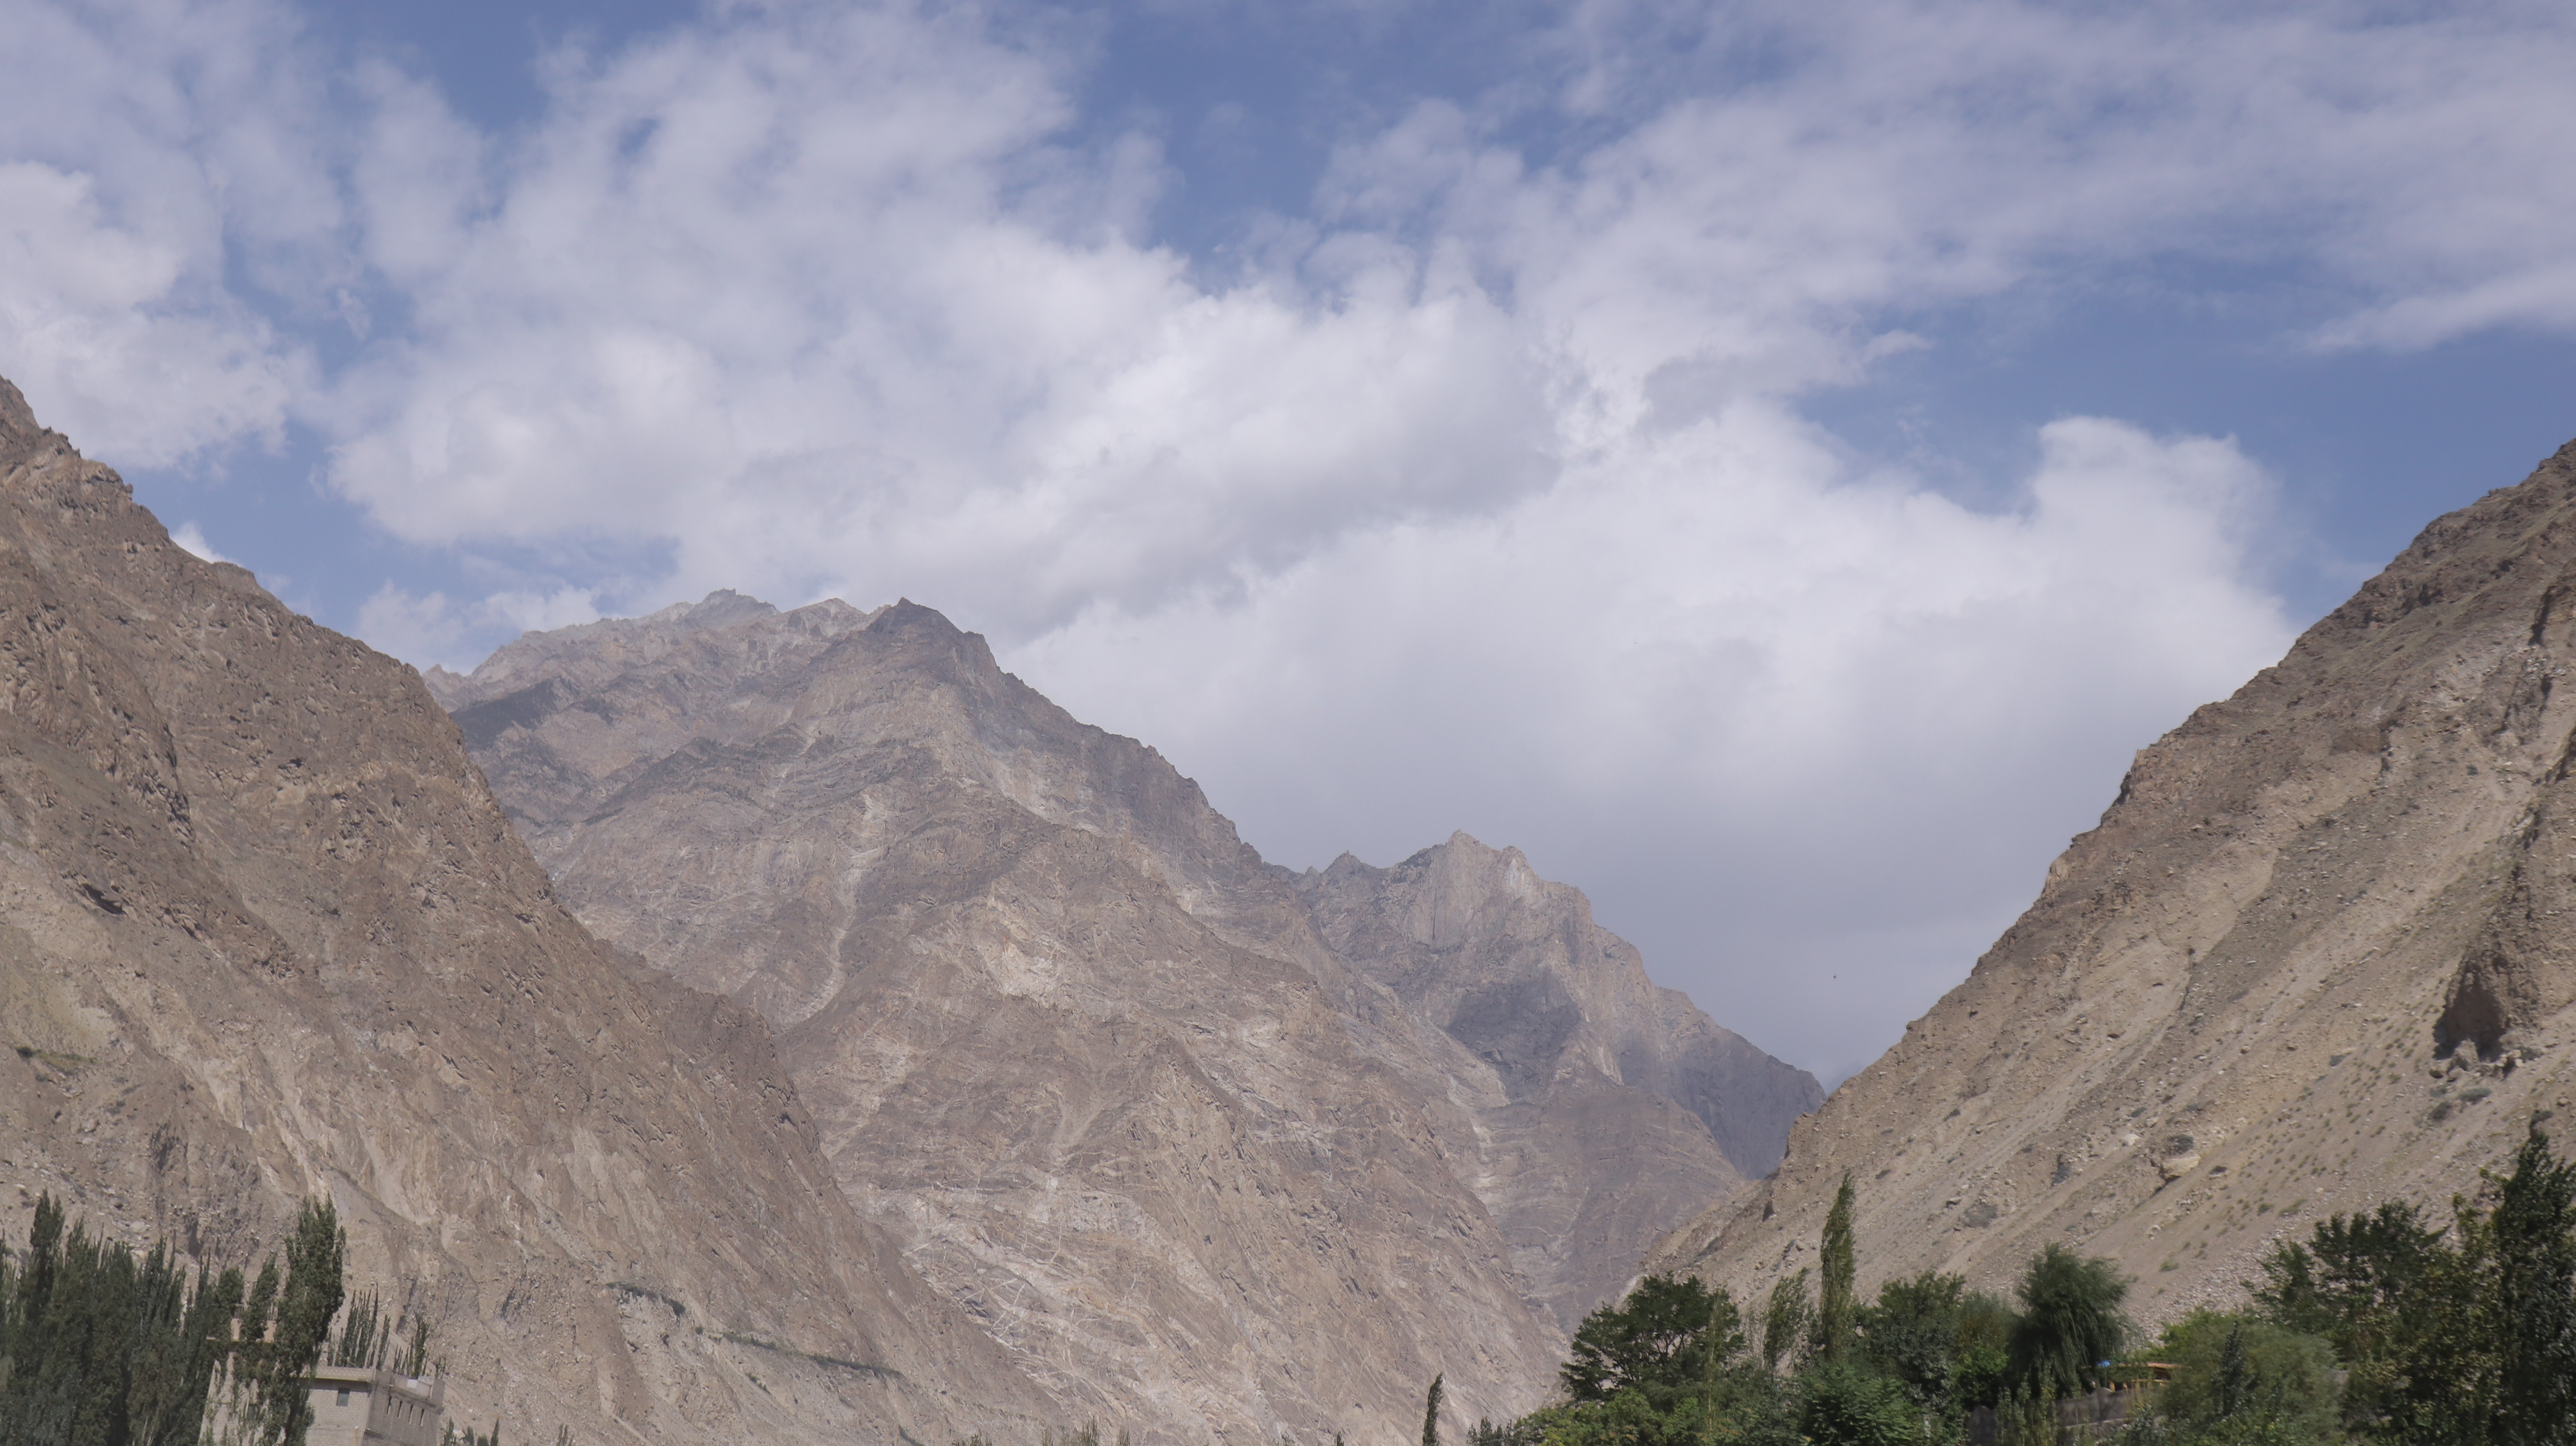 The scenic beauty of passu sar peak with the height of 7478 meters